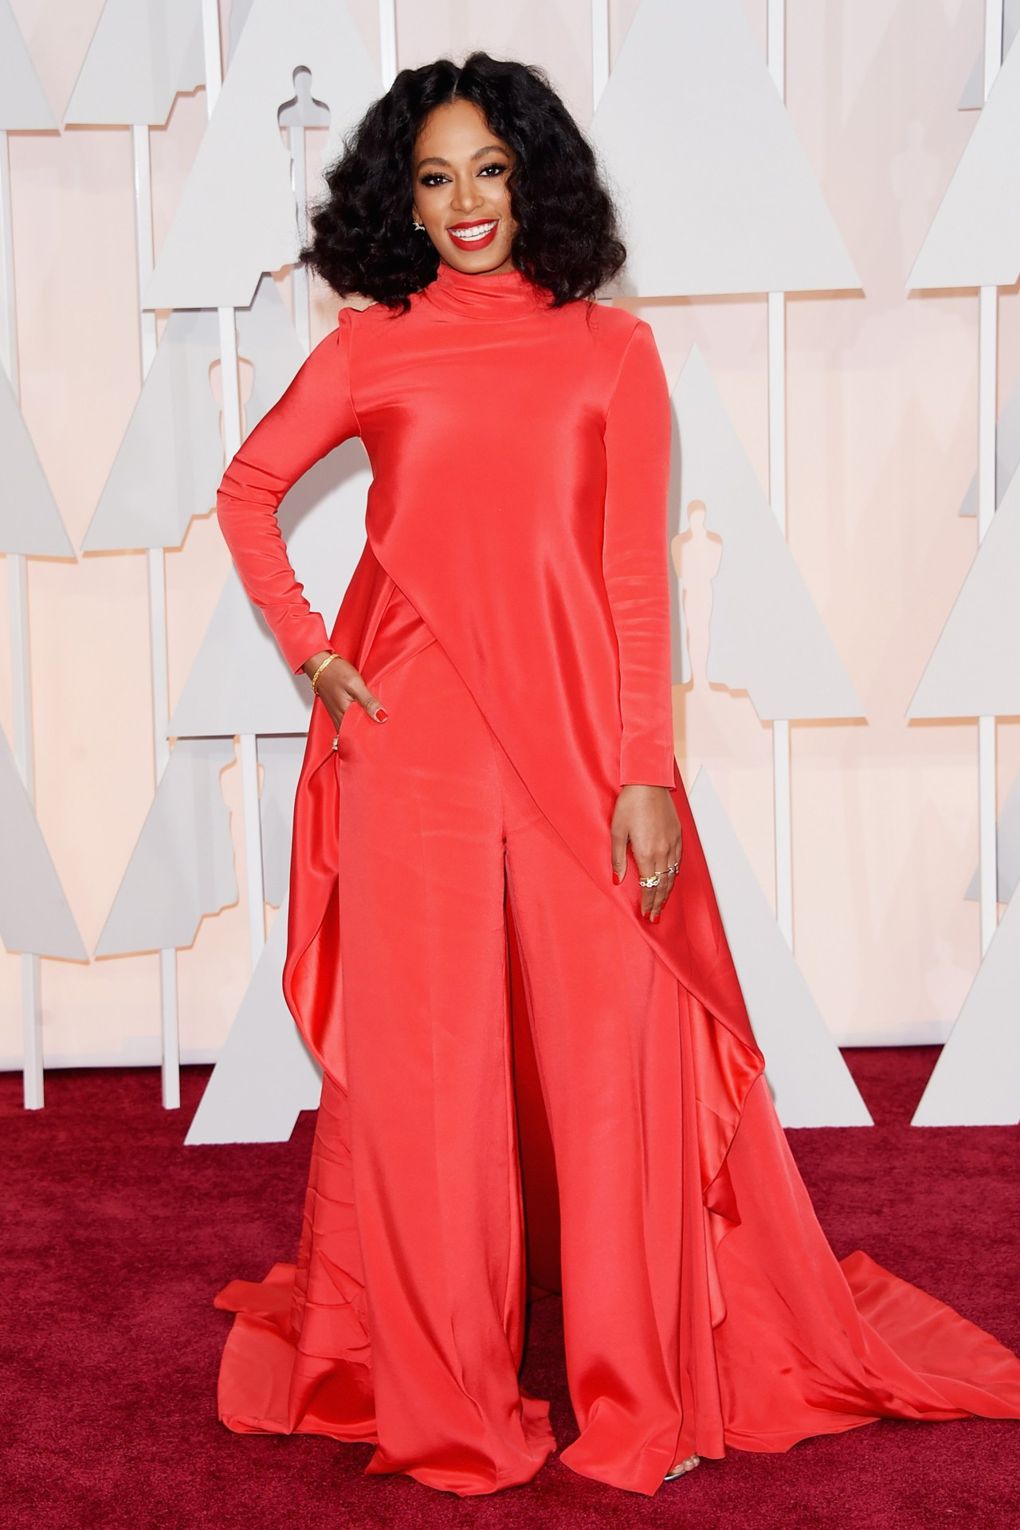 Solange Knowles wearing Christian Siriano in 2015. Photo via Getty Images